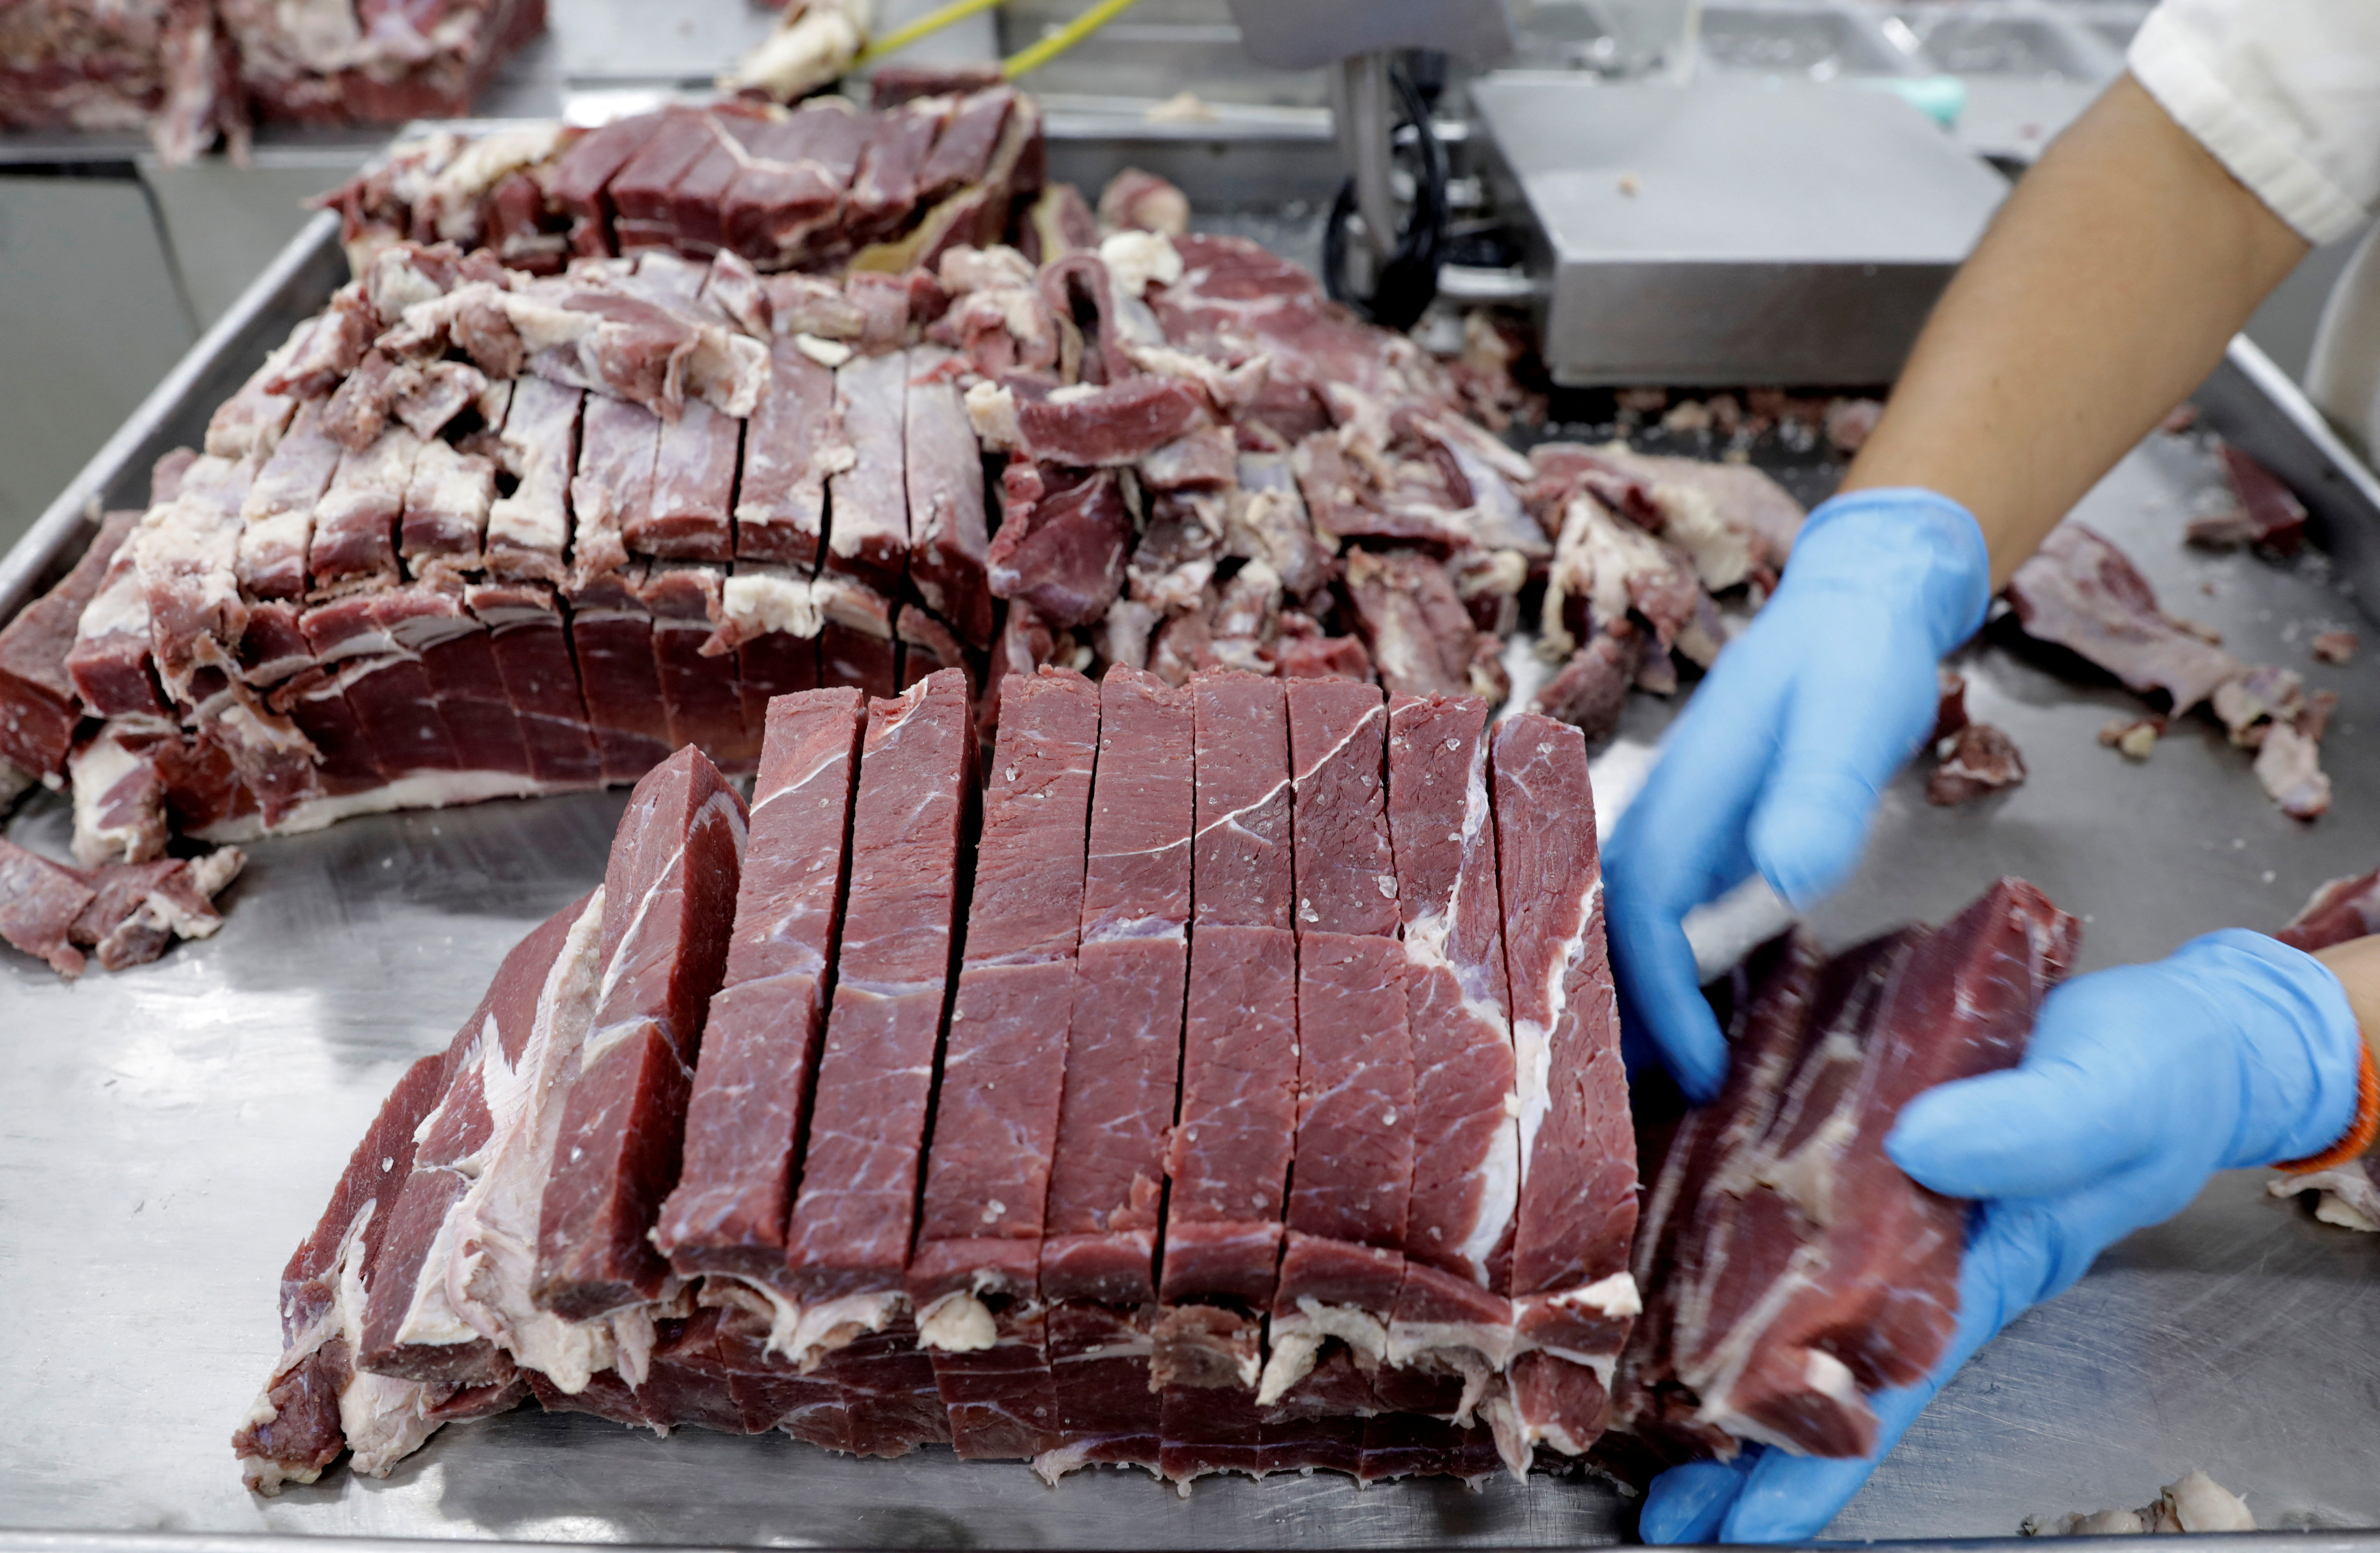 An employee works at the assembly line of jerked beef at a plant of JBS S.A, the world's largest beef producer, in Santana de Parnaiba